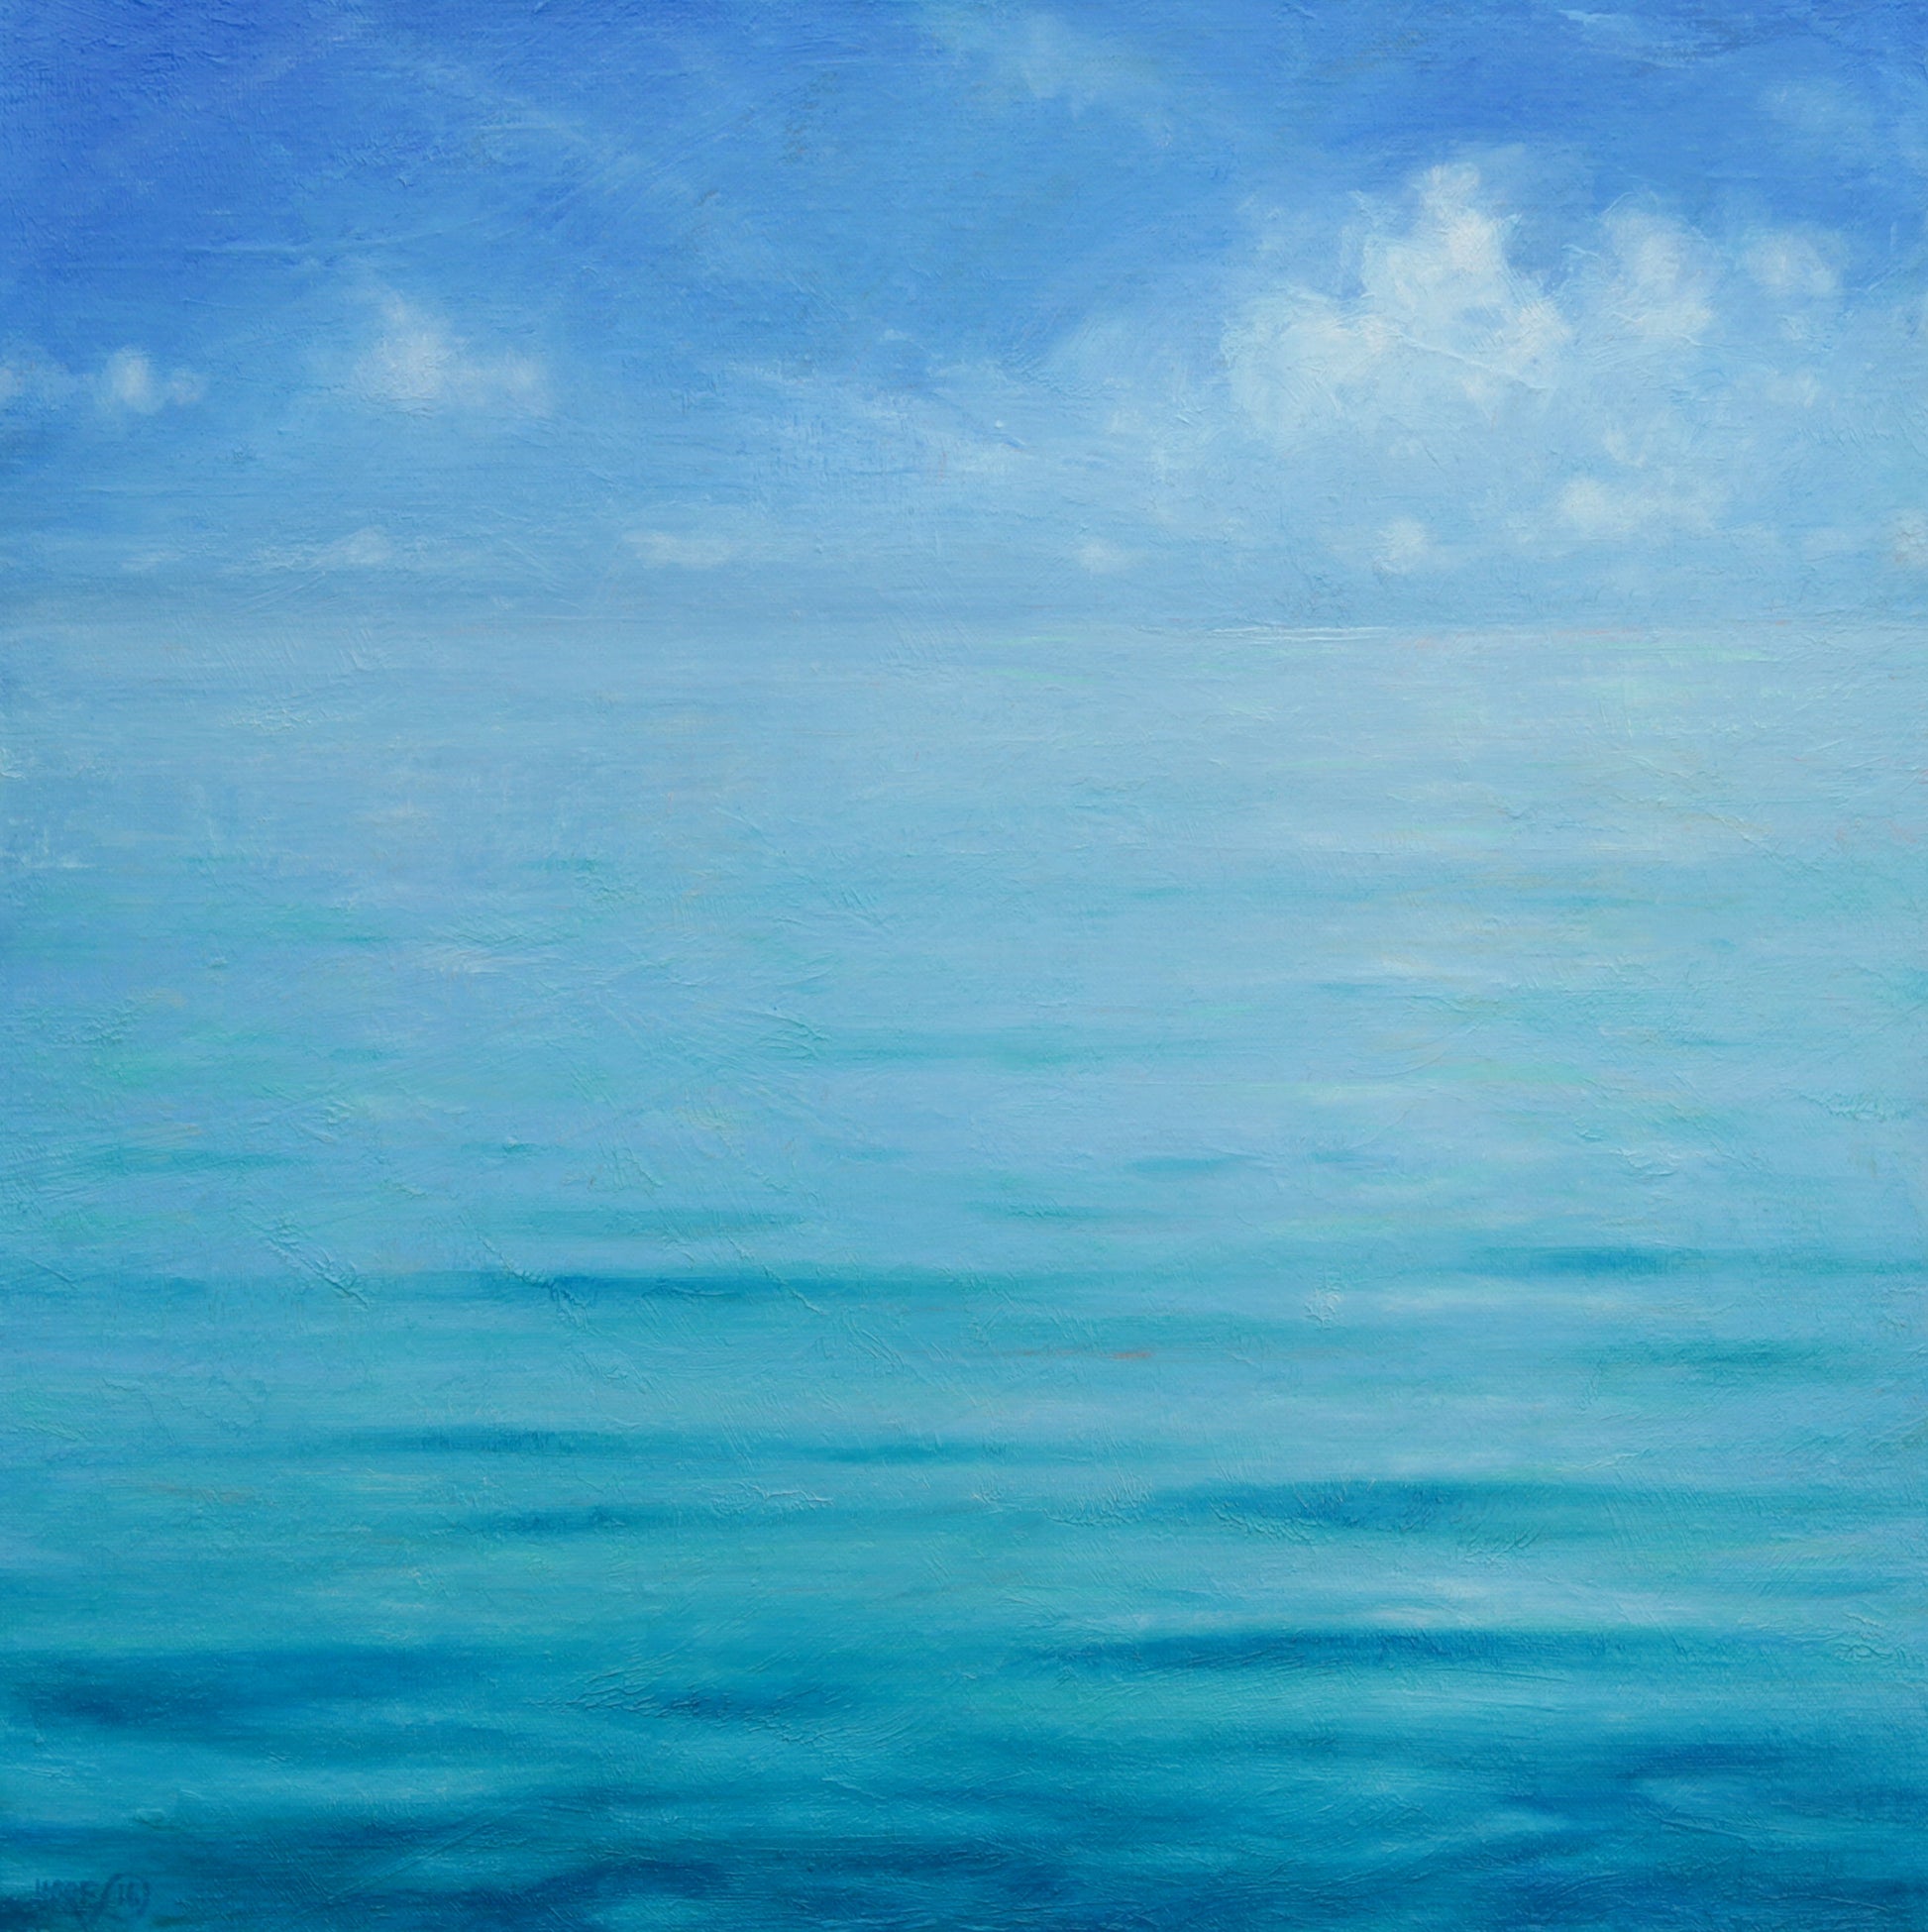 Cloud Over Water. 18ins x 18ins. 2016. Seascape painting by Derek Hare